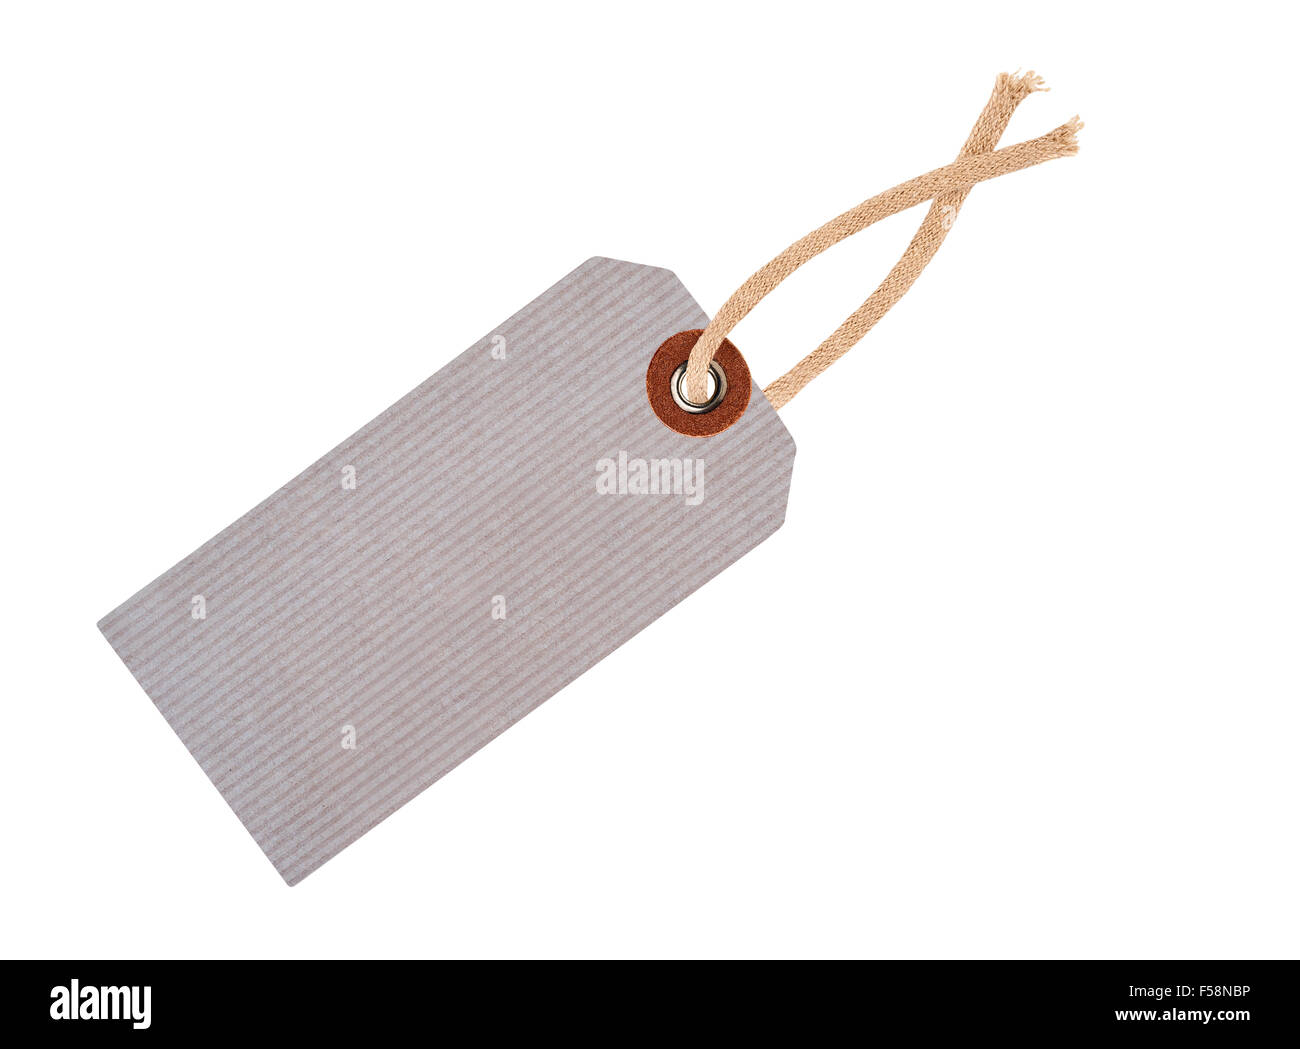 Blank Gift Tags and String Stock Photo by ©scukrov 59500585